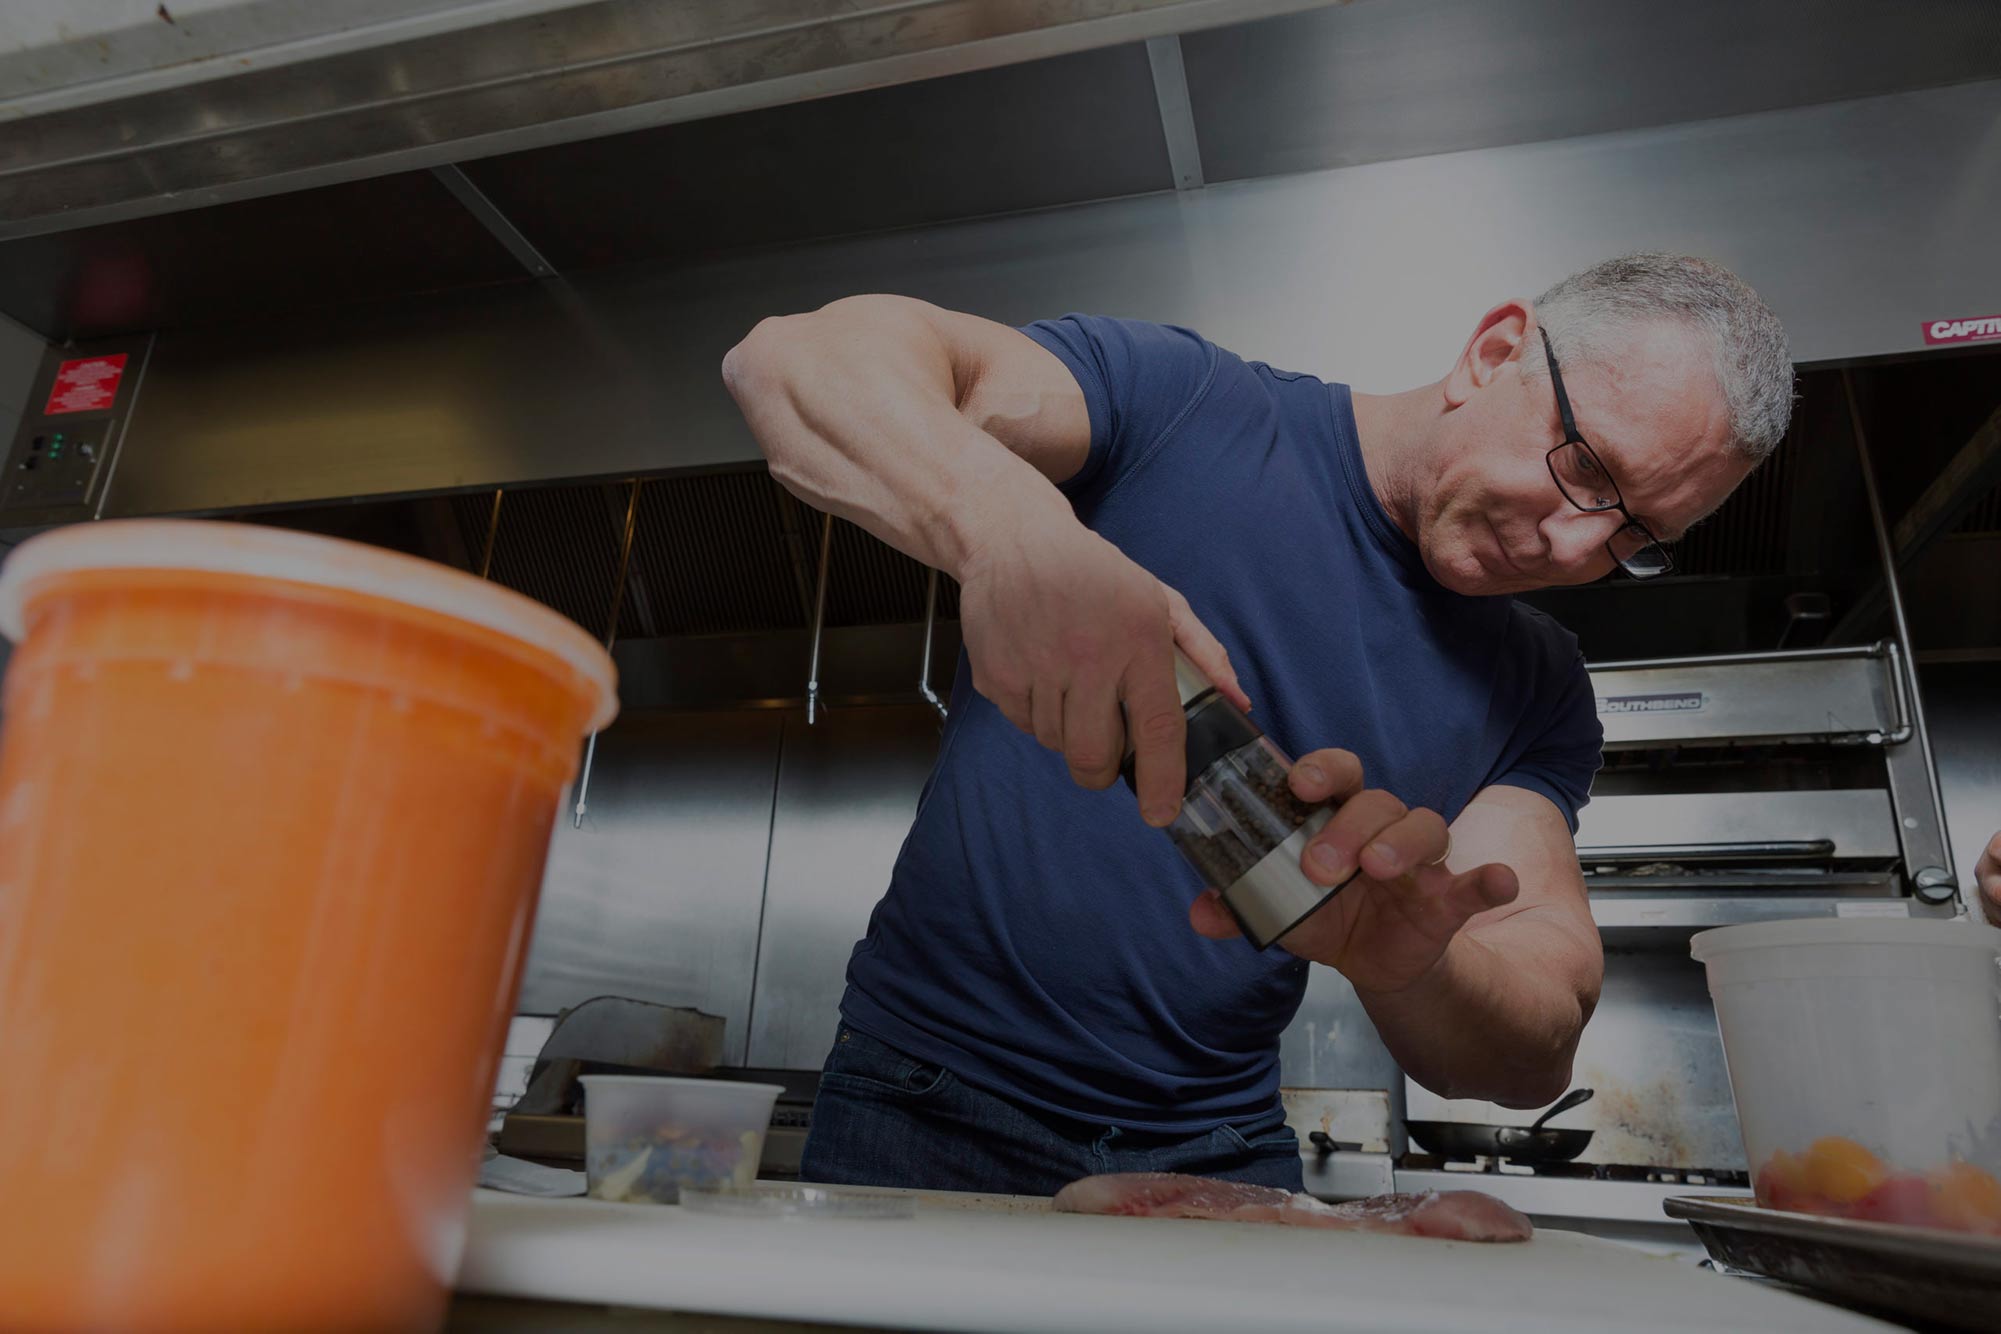 His Mission, ‘Impossible’: An Interview With Chef Robert Irvine